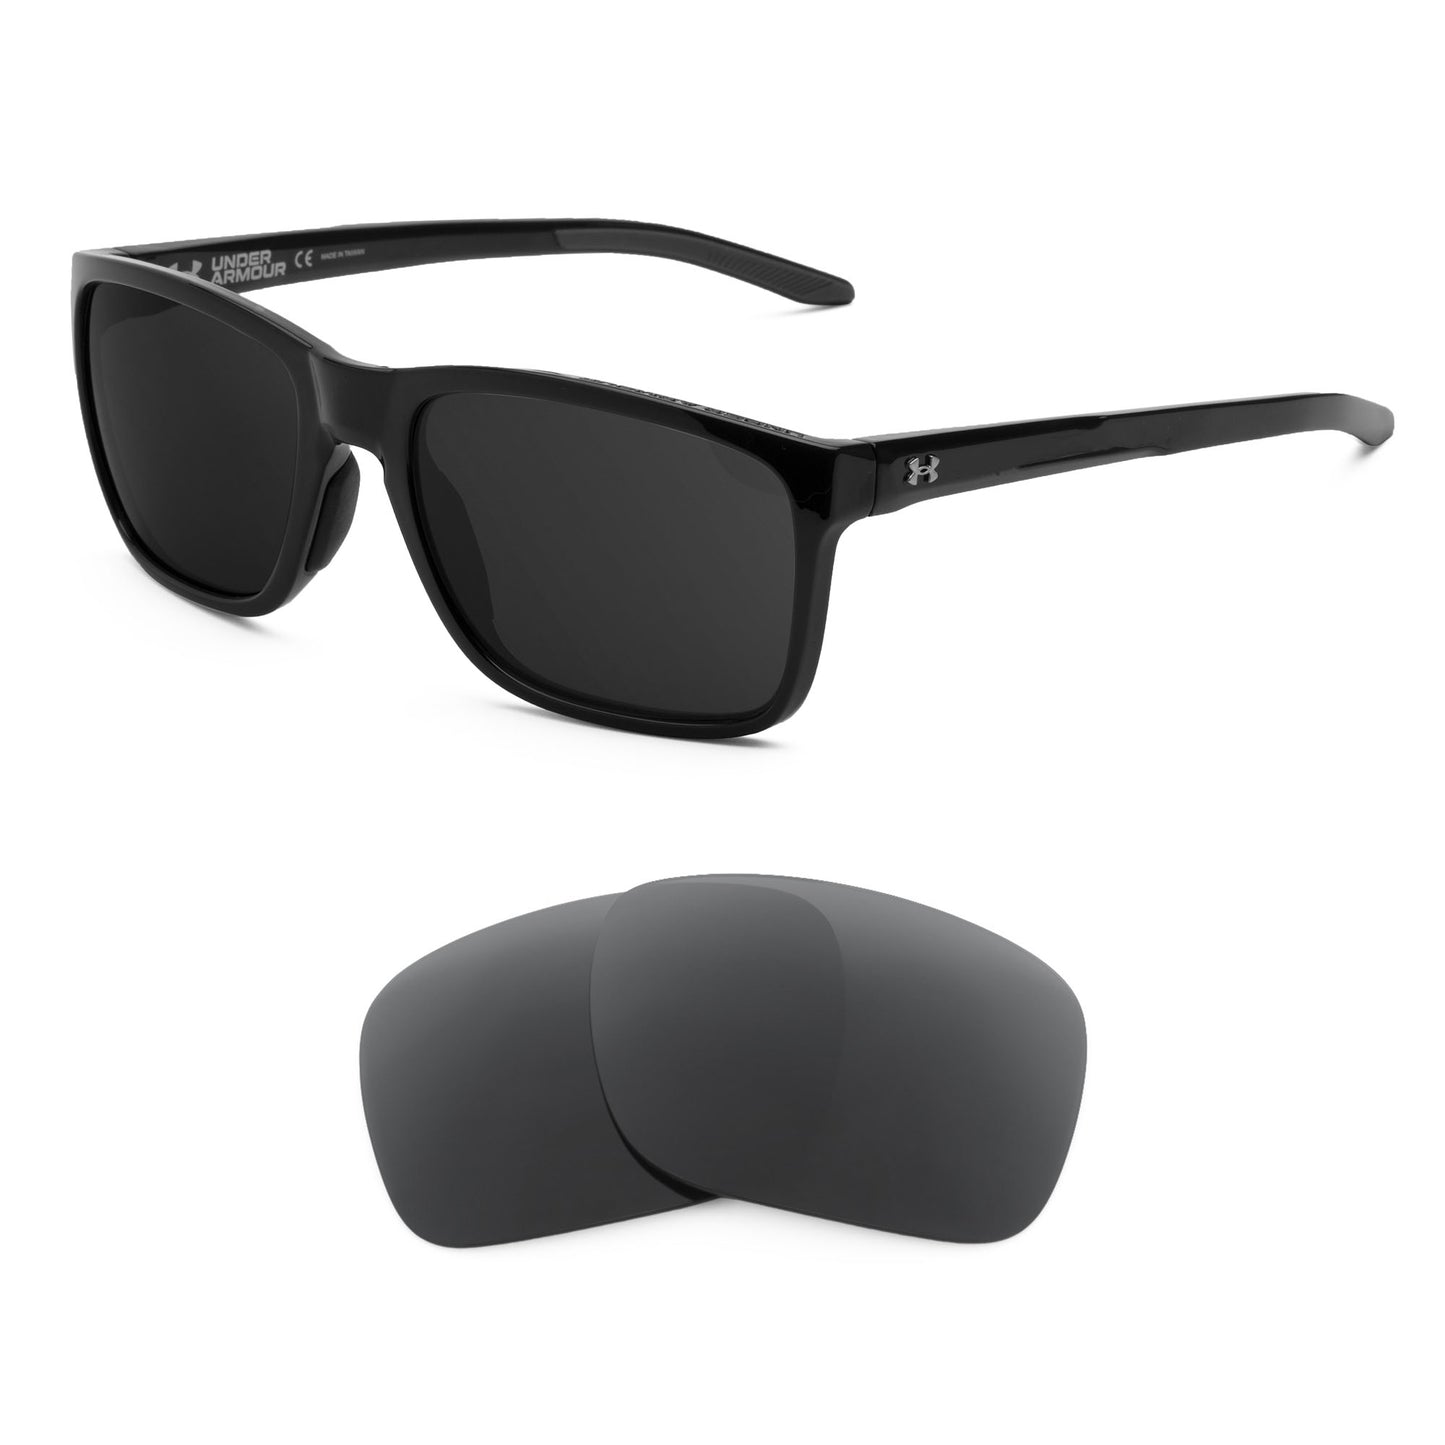 Under Armour Hustle sunglasses with replacement lenses